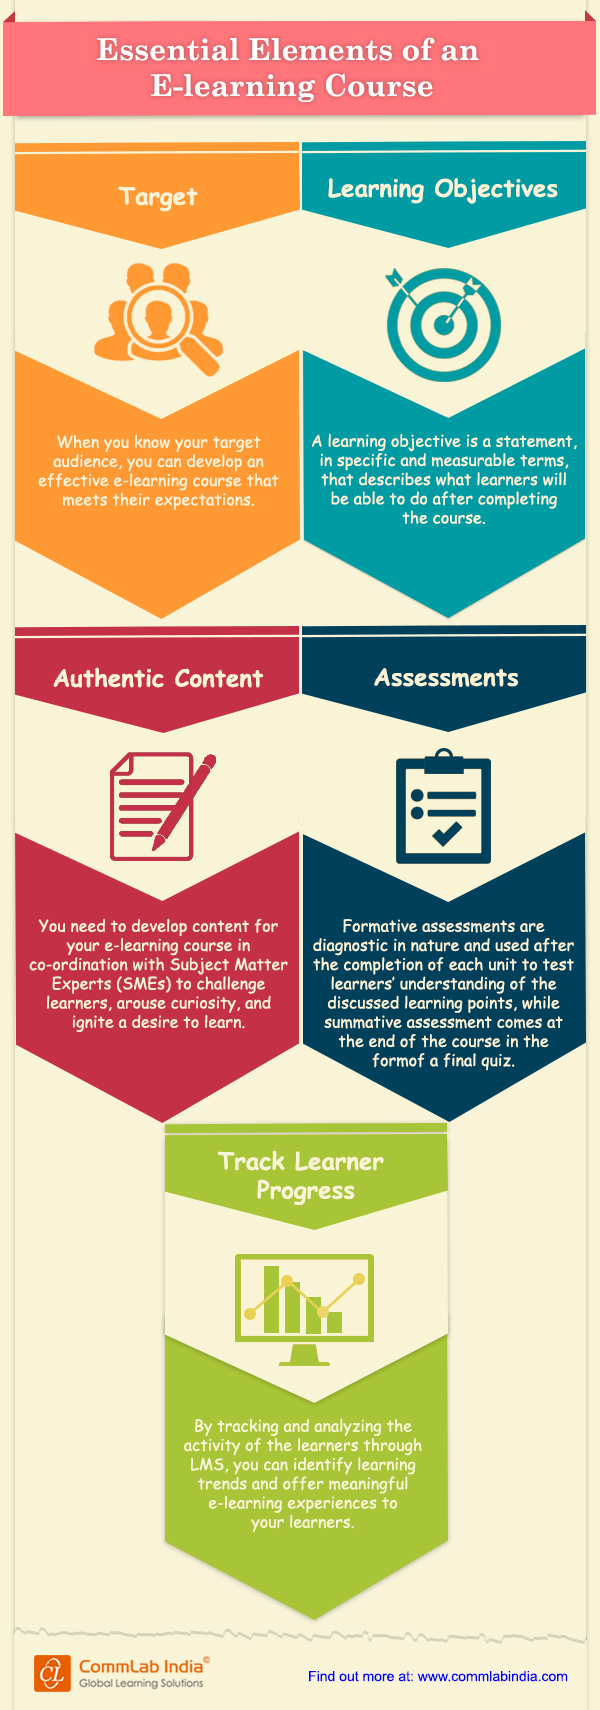 Essential Elements of an E-learning Course [Infographic]